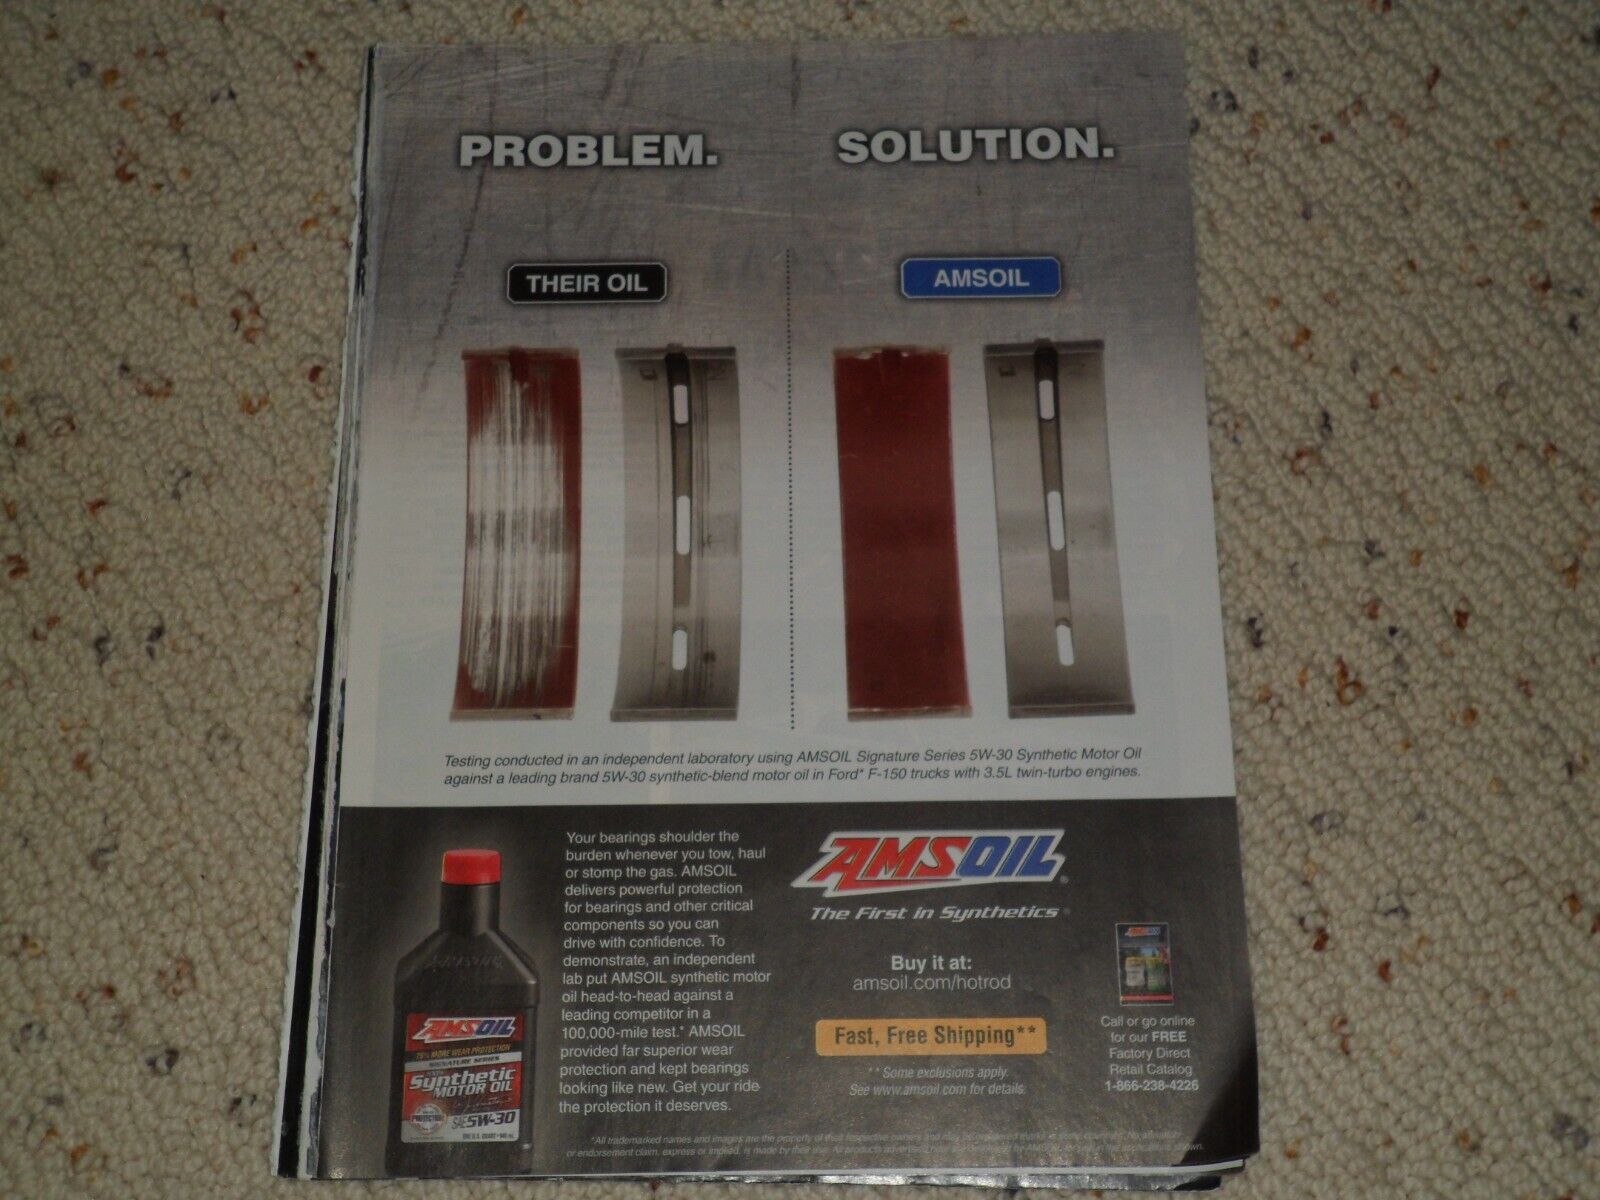 2020 AMSOIL AD / ARTICLE